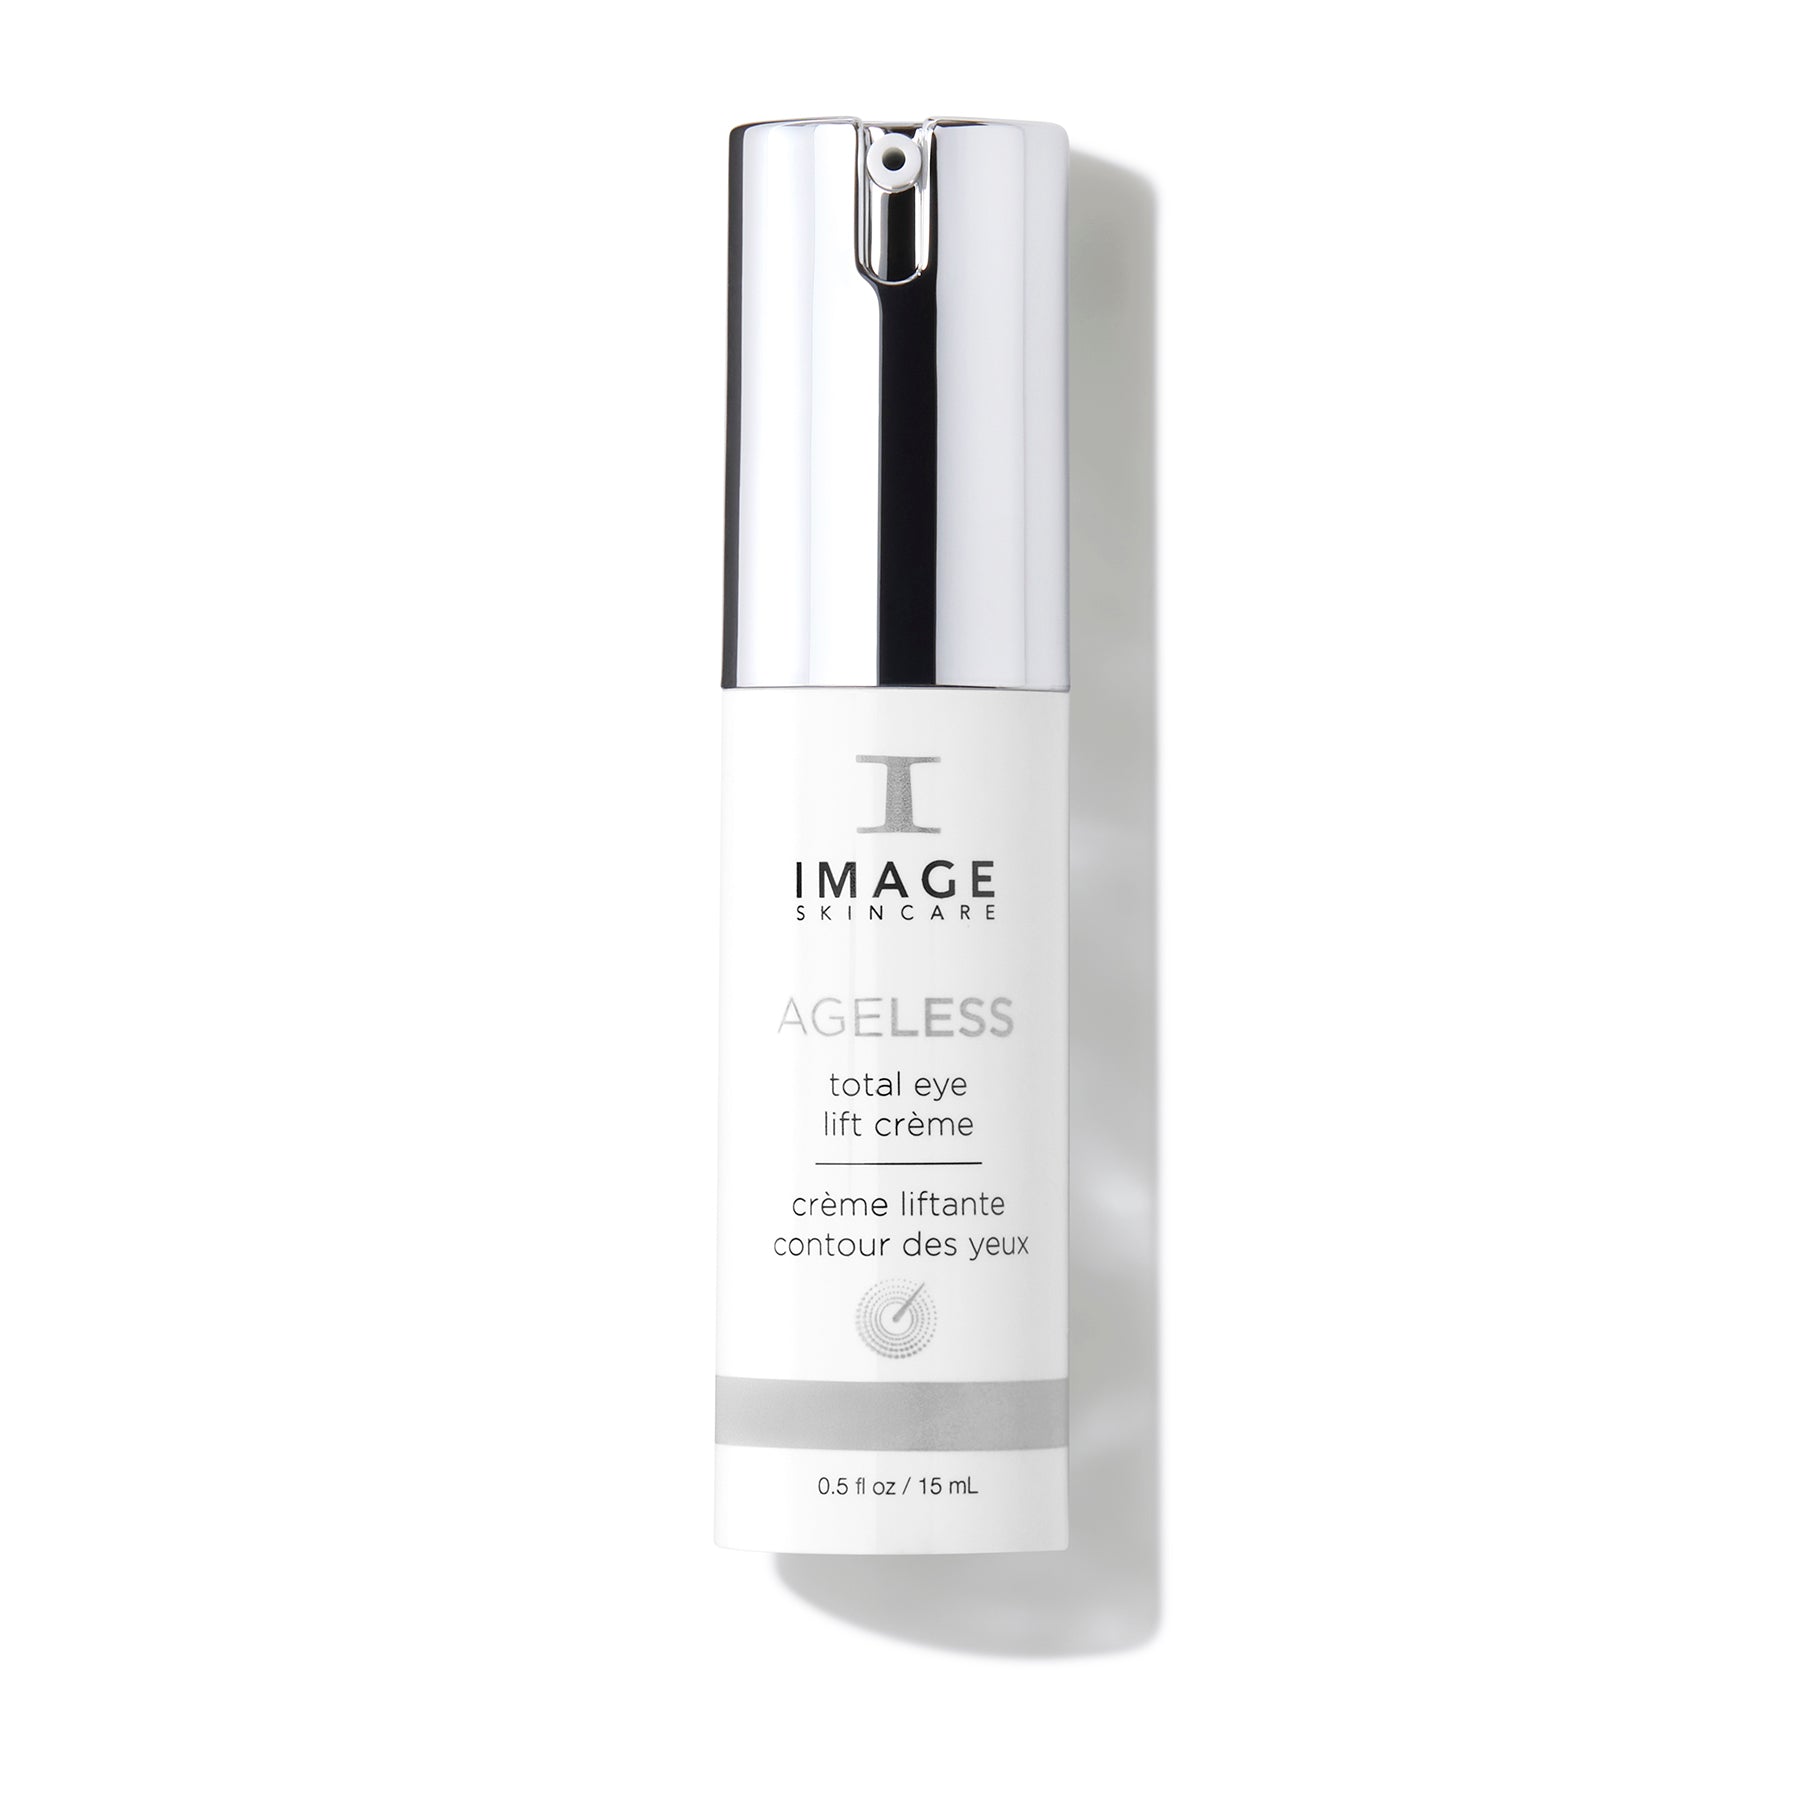 Image Skincare Ageless Total Eye Lift Creme Shop At Exclusive Beauty